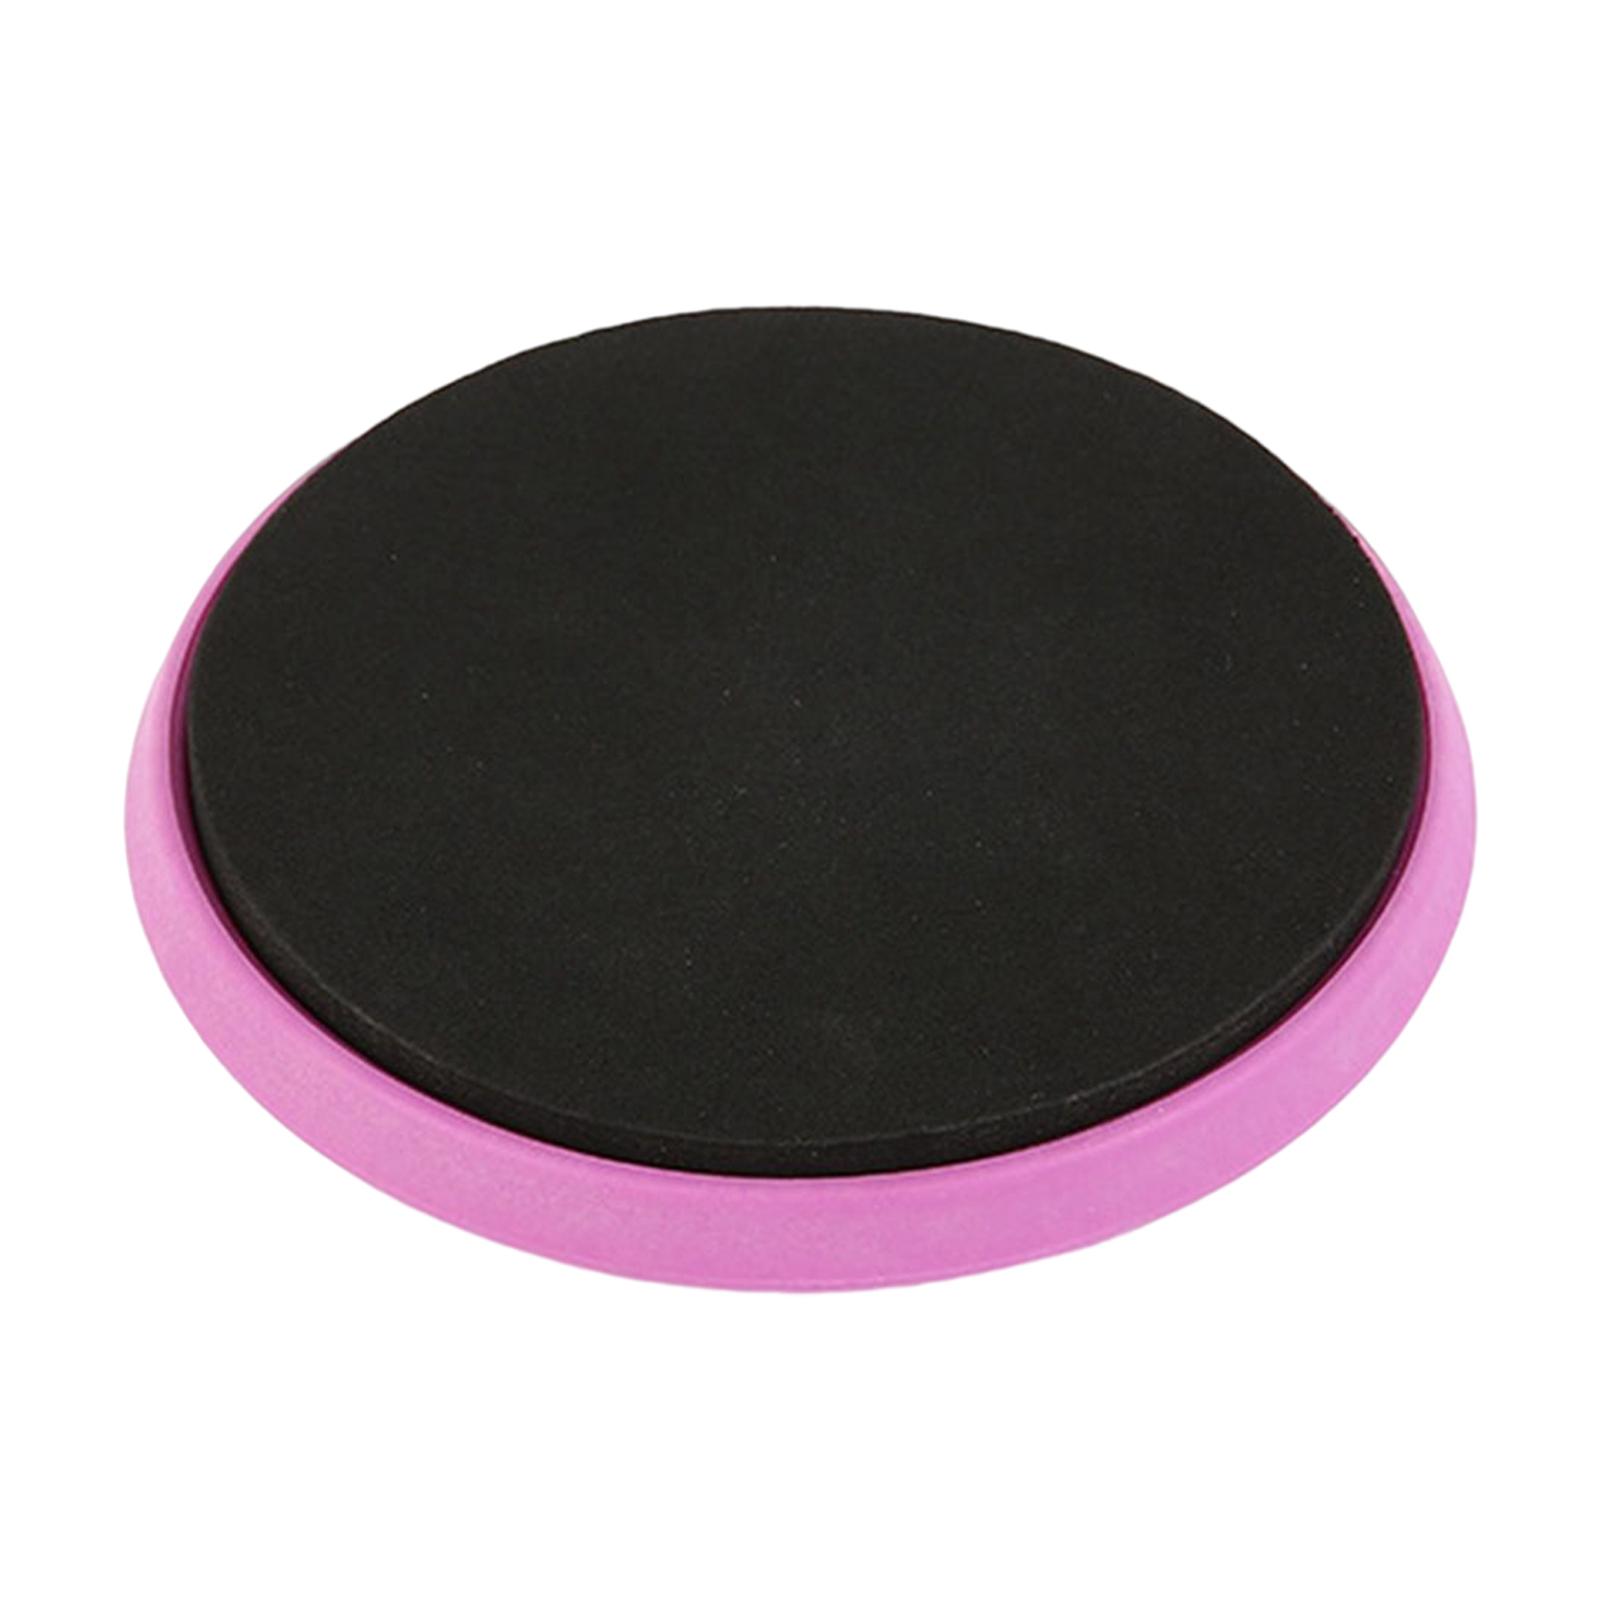 Round Ballet Turning Board Balance Portable Practice for Pirouette Dancers purple